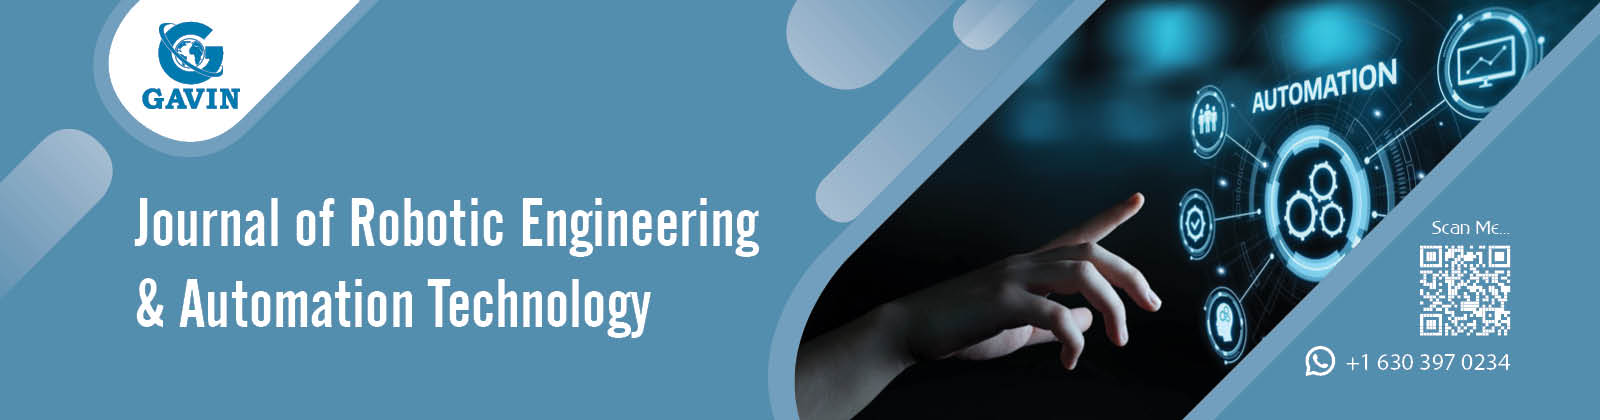 Journal of Robotic Engineering & Automation Technology